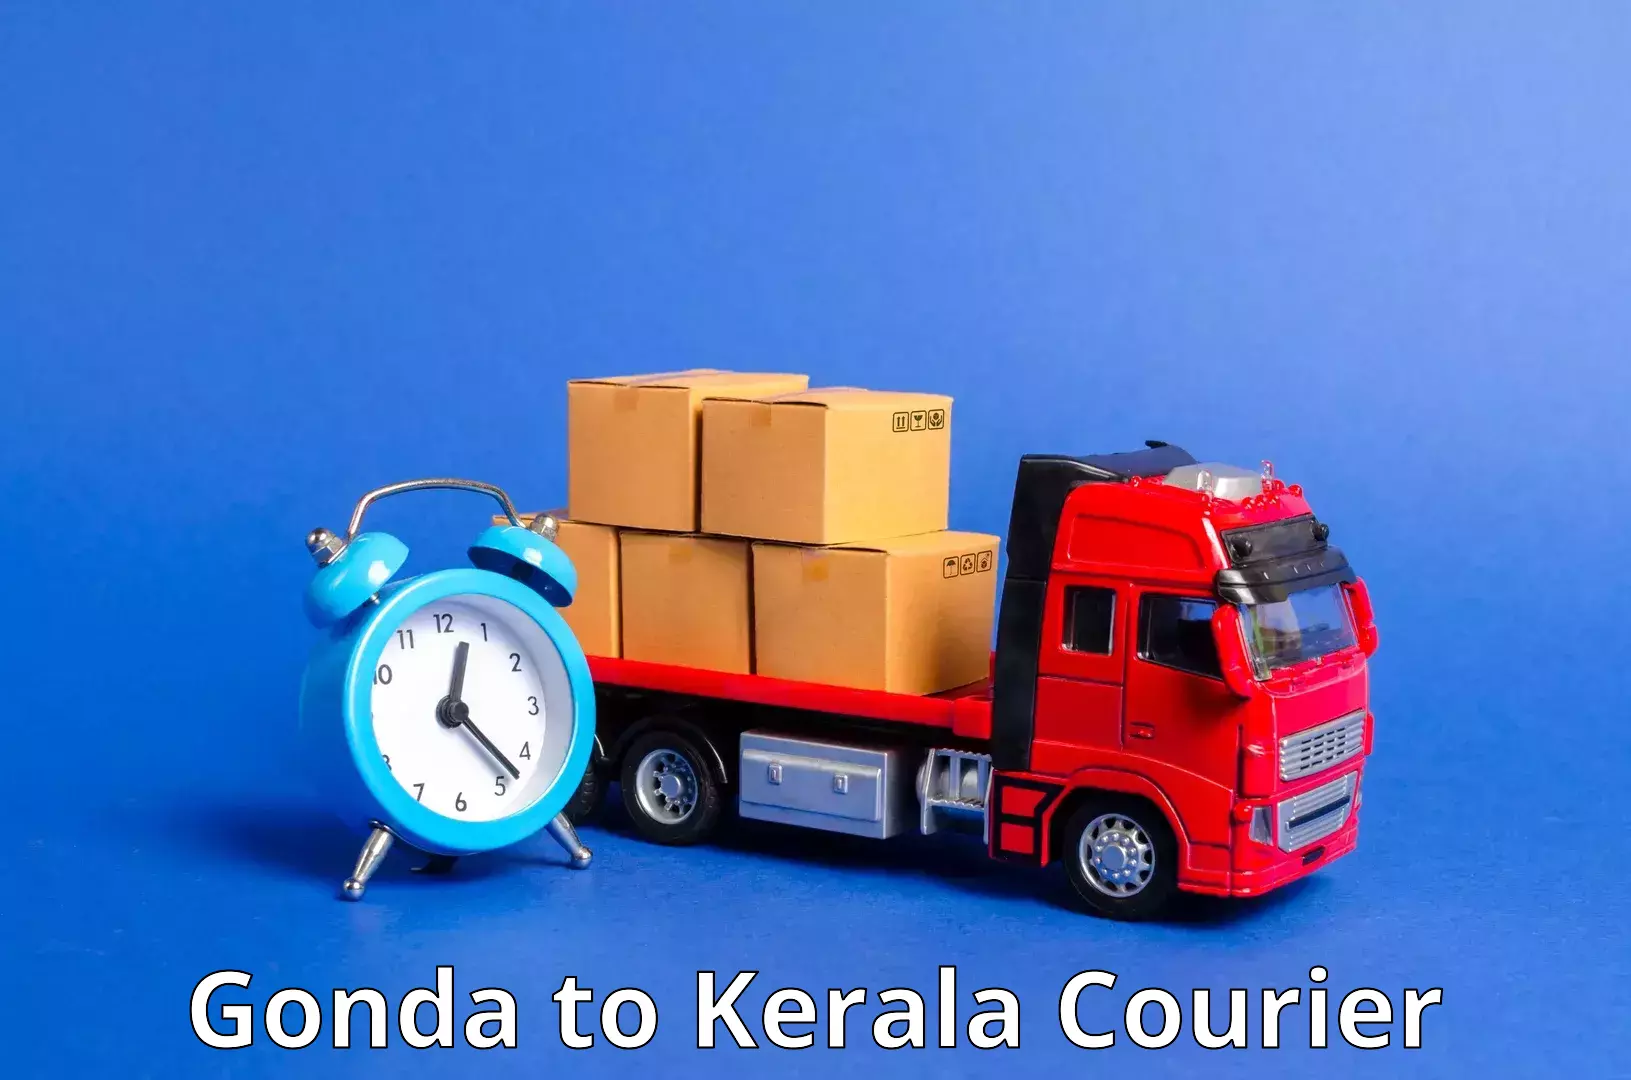 Comprehensive shipping network Gonda to Thrissur